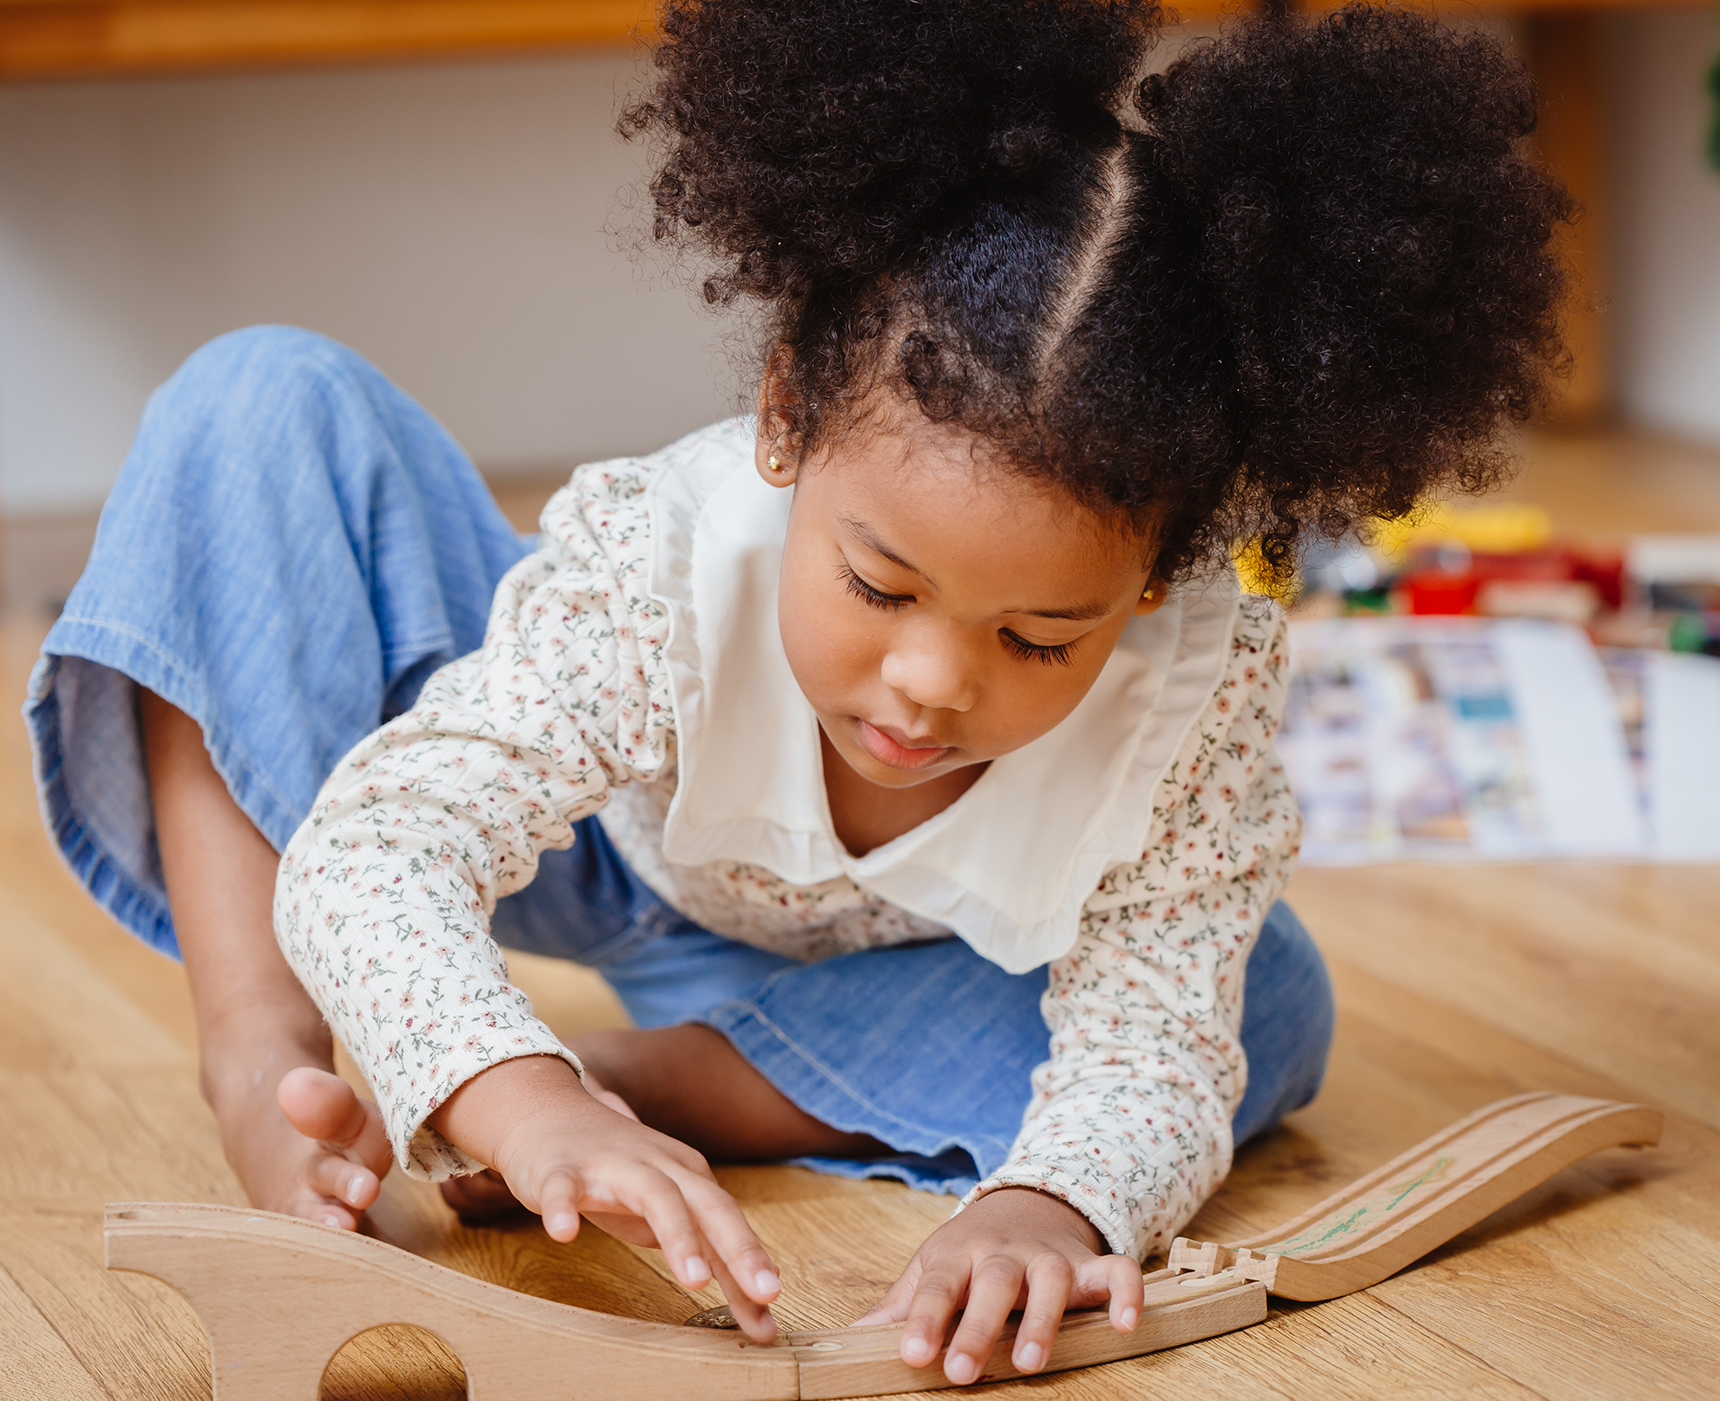 little cute child girl enjoy playing wood puzzle on the wooden floor at home in living room.